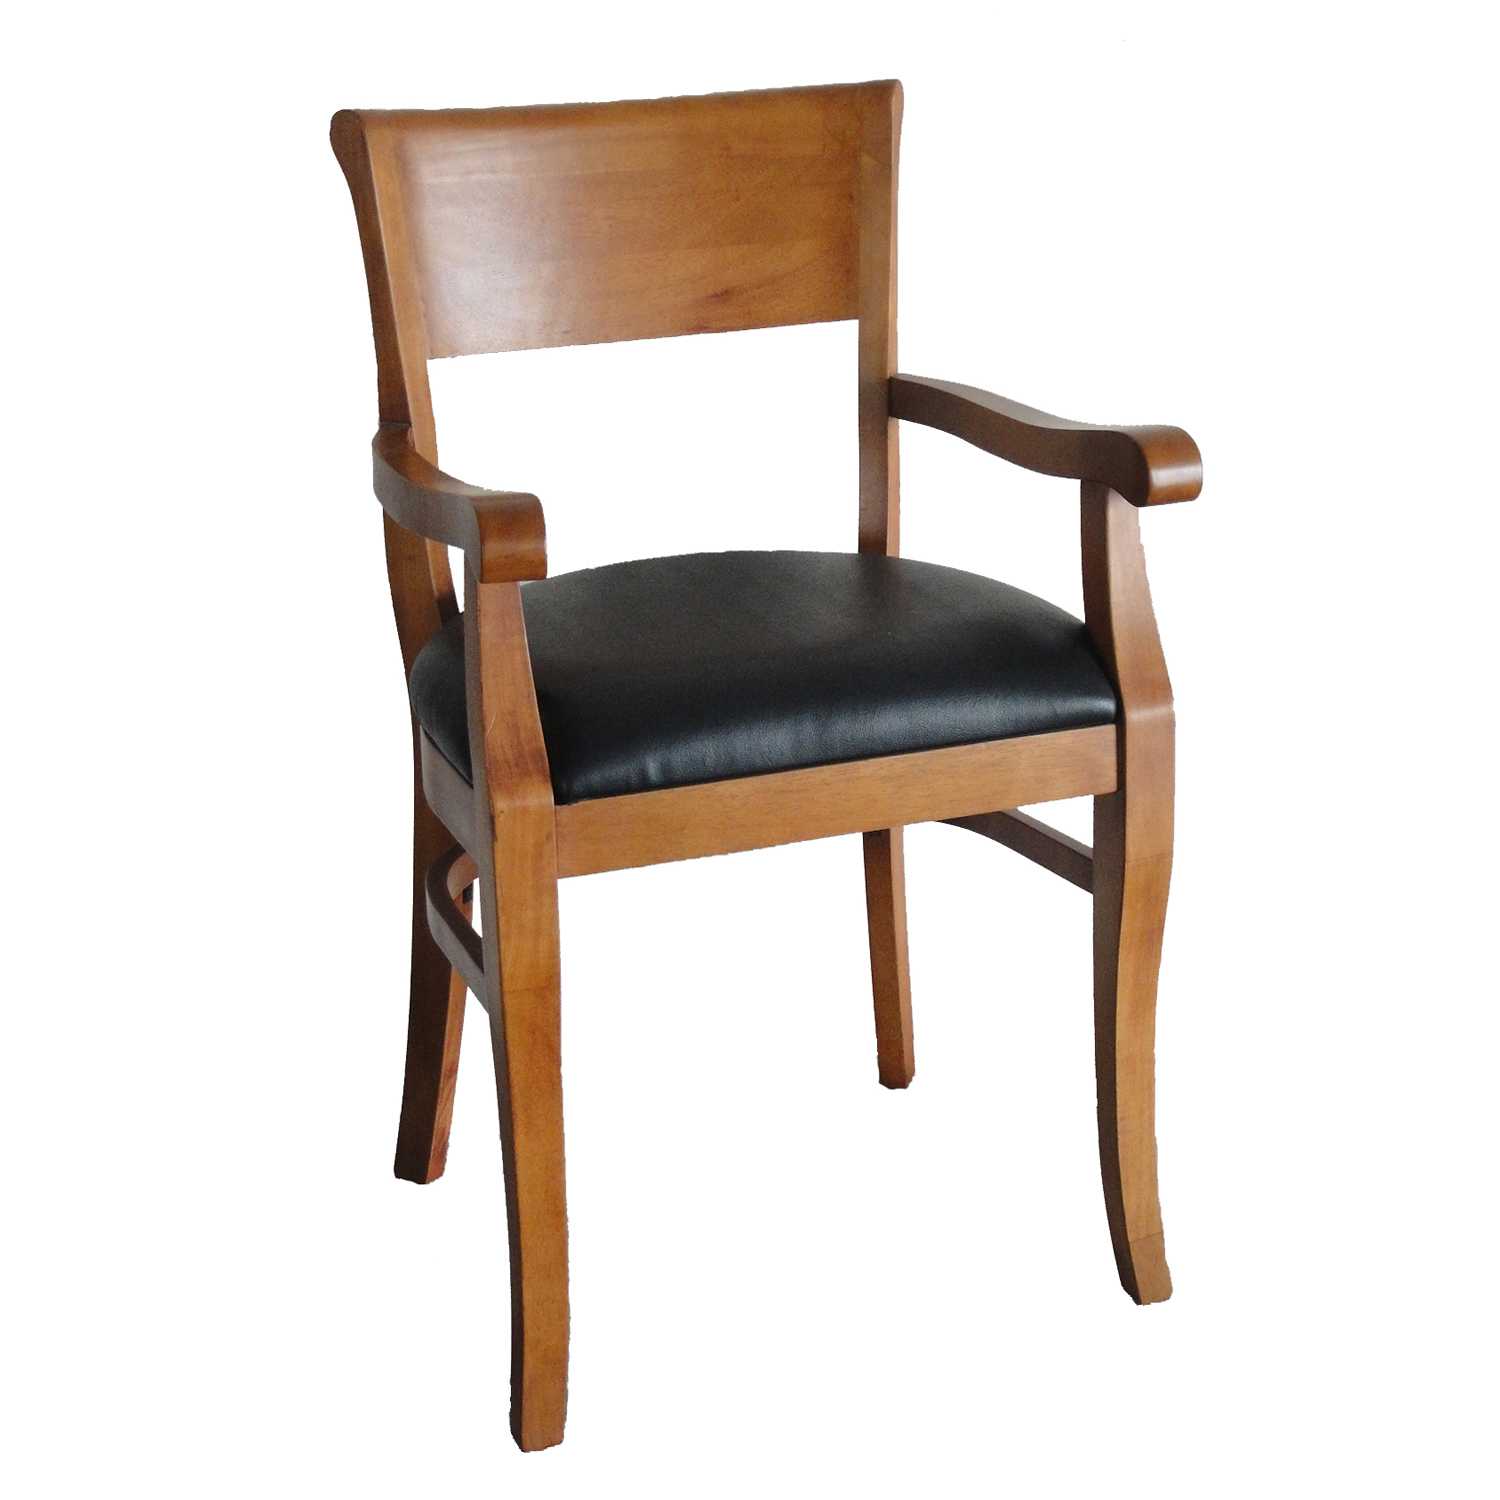 Solid Wood Chairs Specifiation